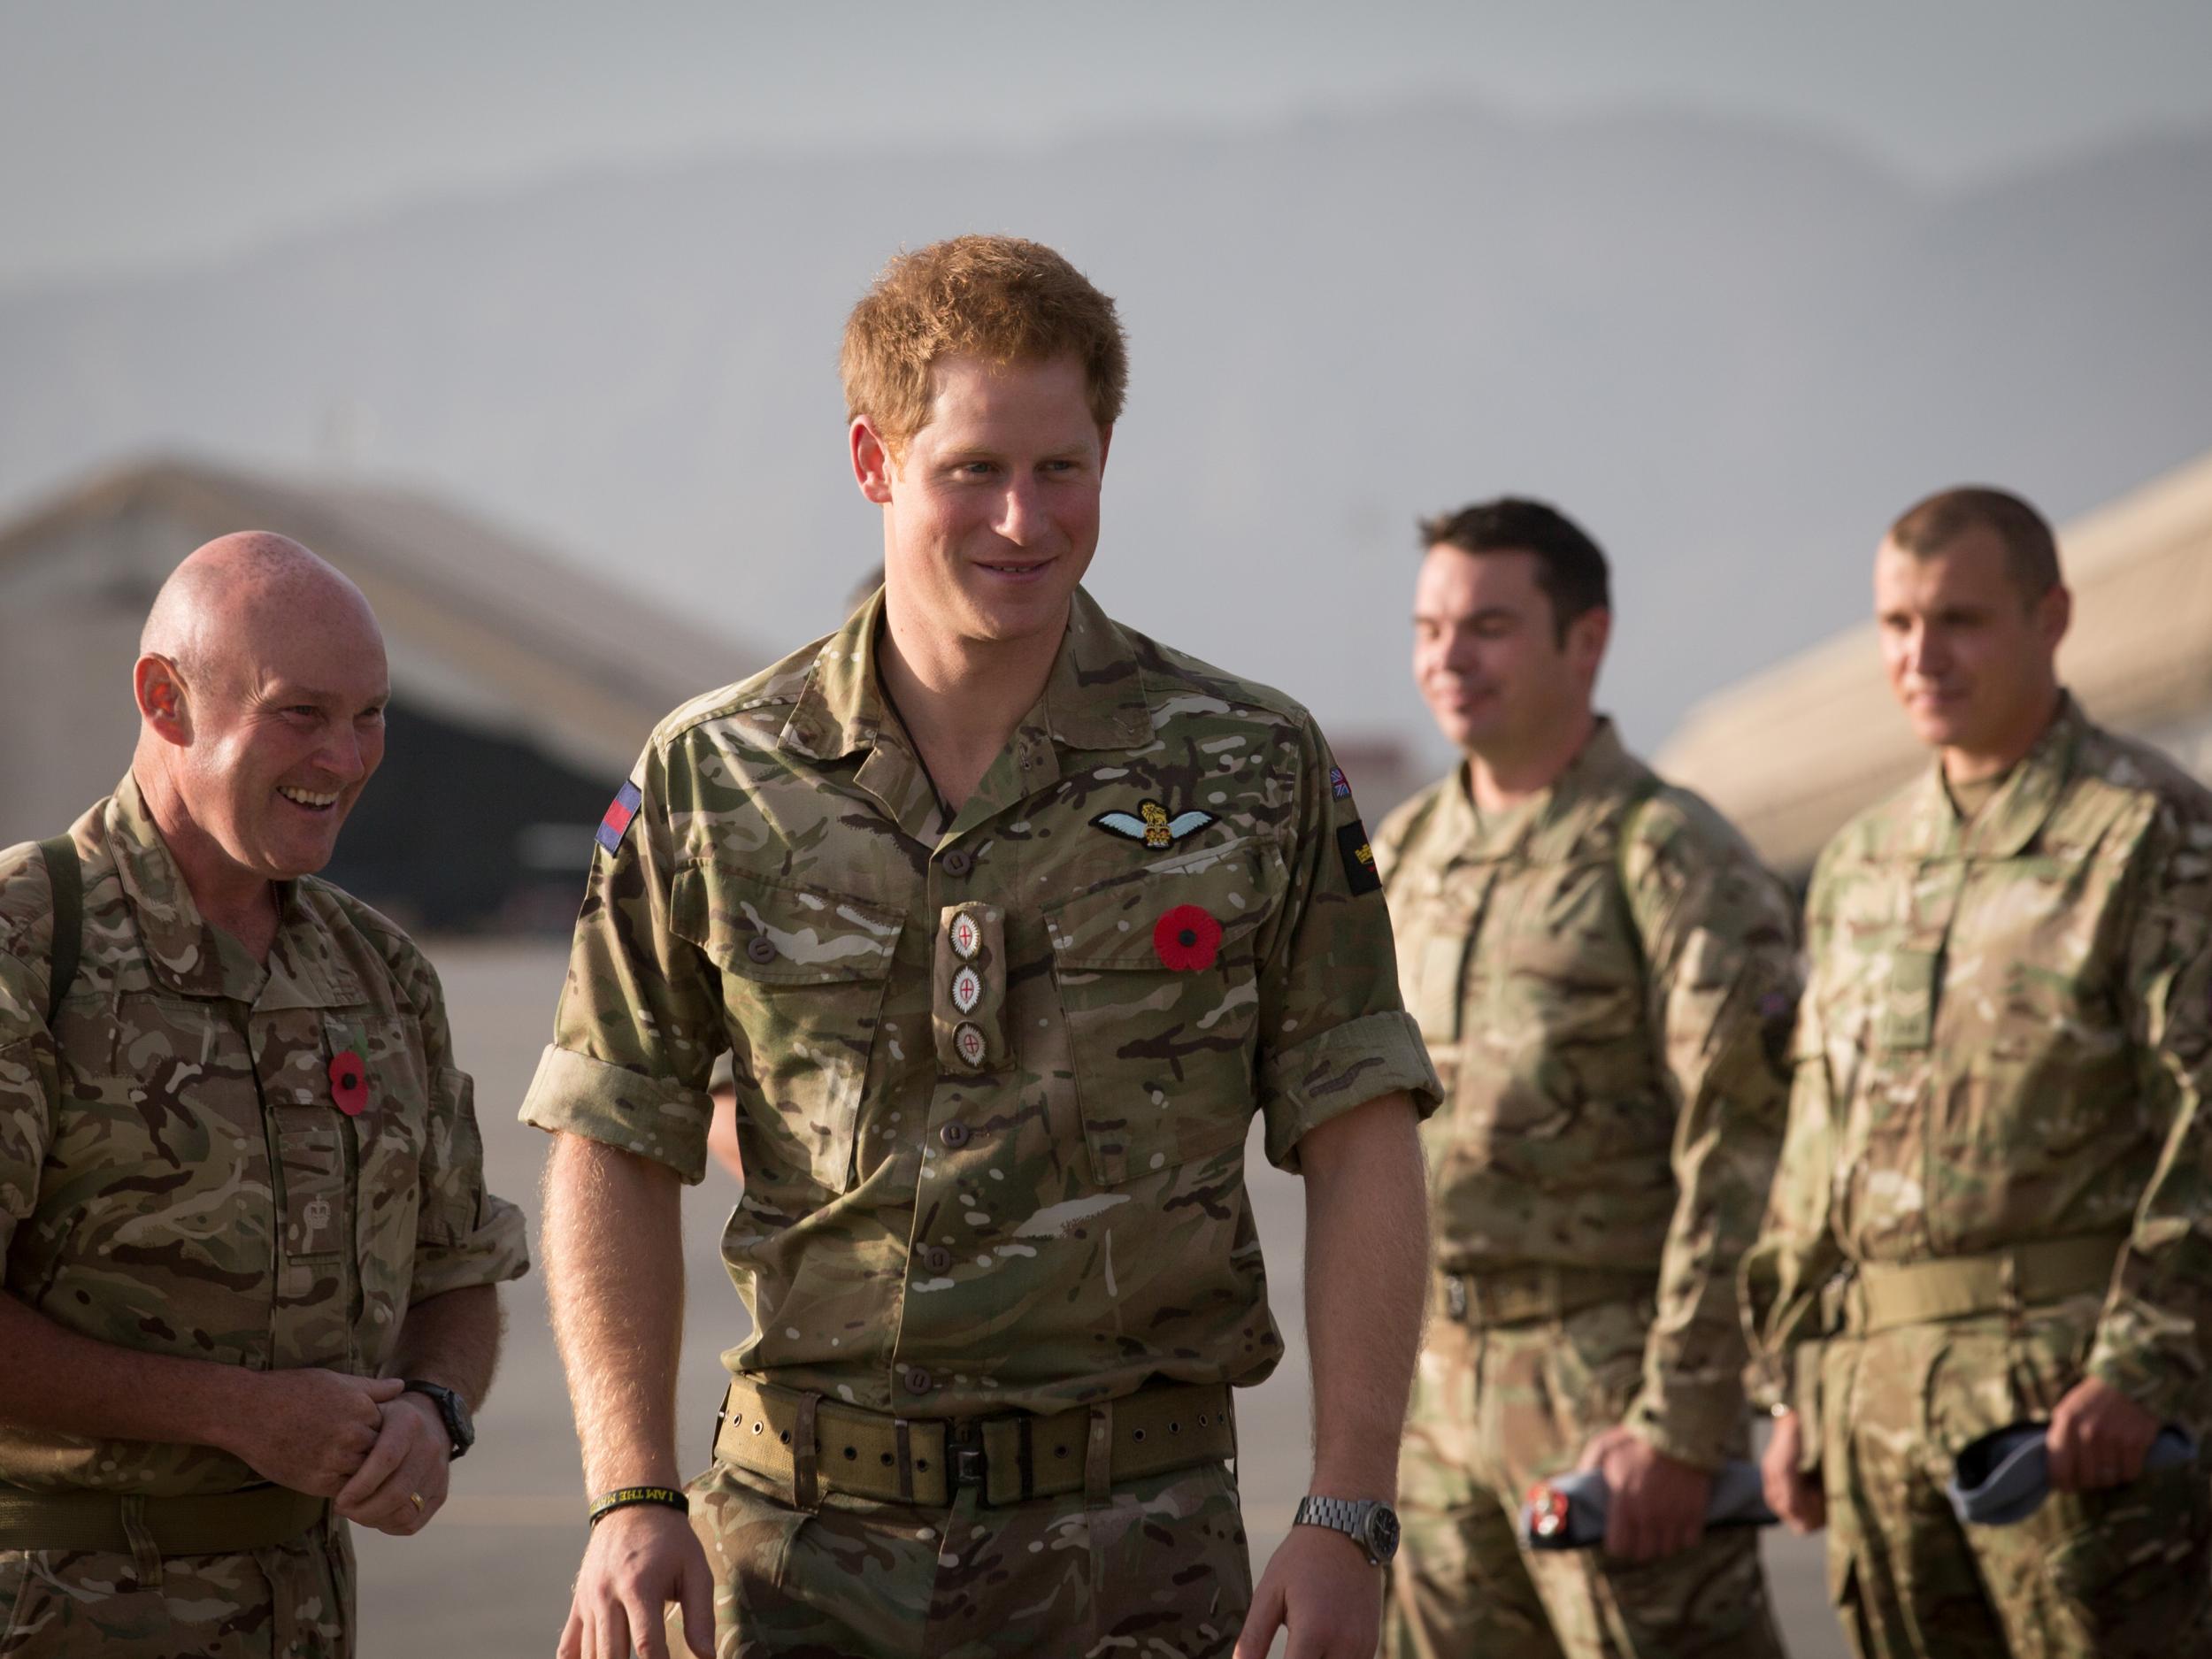 The prince was scheduled to travel to Iraq, but officials changed their mind and he served a tour in Helmand in Afghanistan later that year